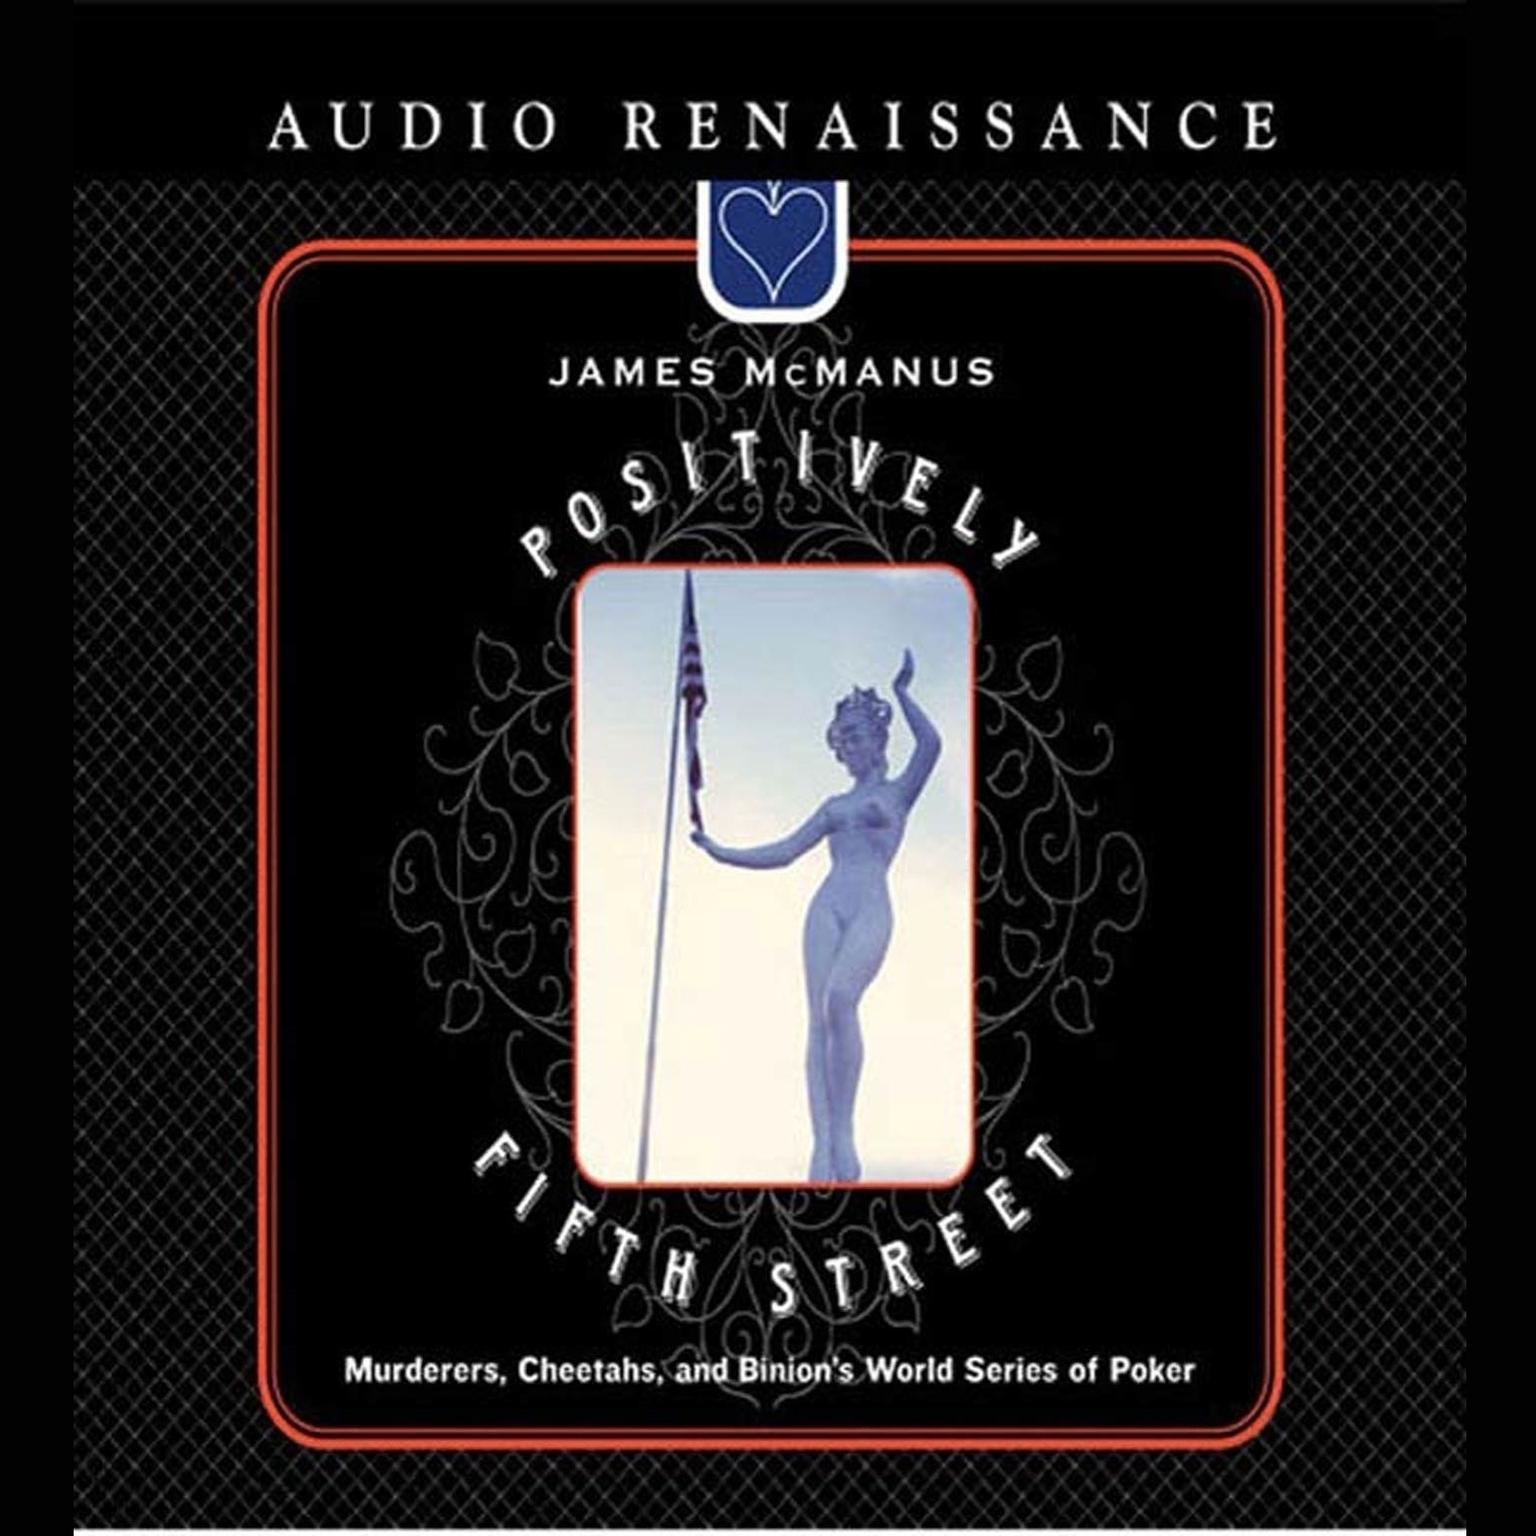 Positively Fifth Street (Abridged): Murderers, Cheetahs, and Binions World Series of Poker Audiobook, by James McManus